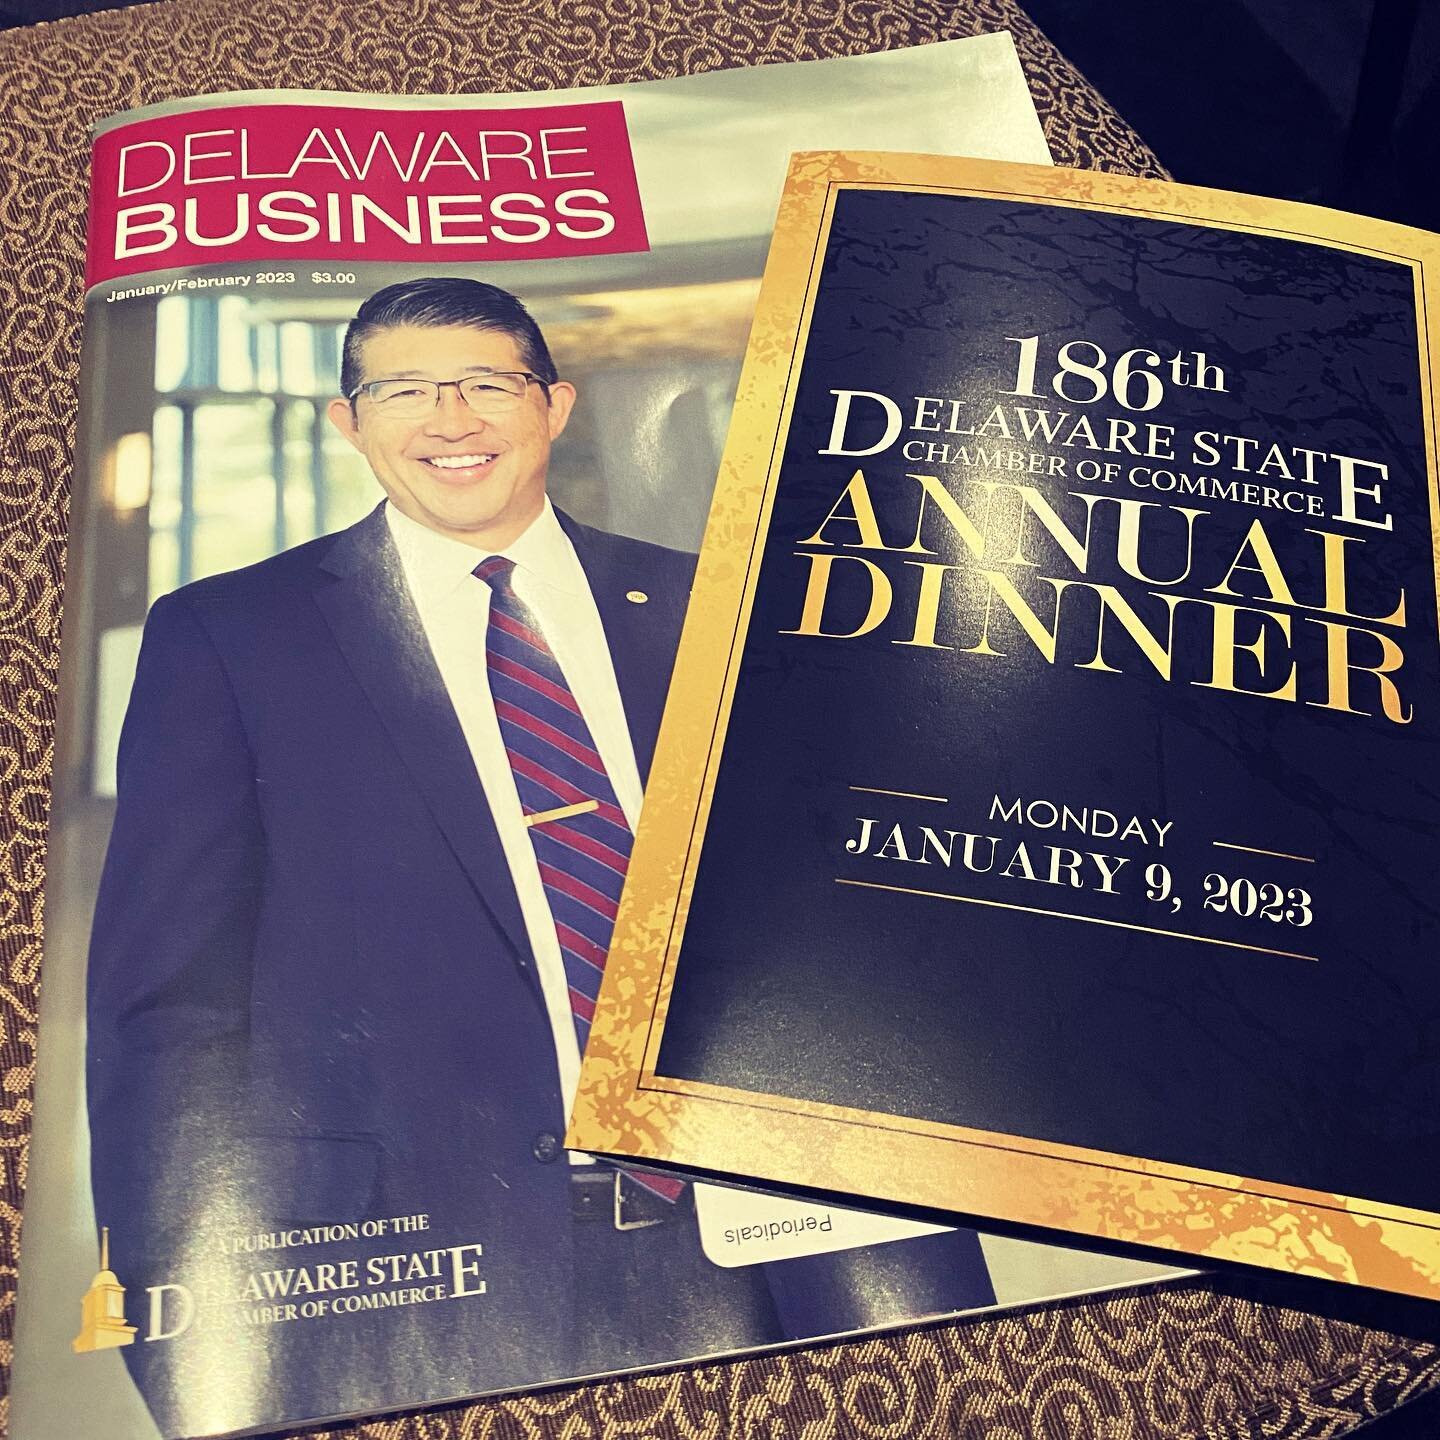 Enjoyed the networking and evening at the Delaware State Chamber of Commerce annual dinner and also hearing from keynote Dr. Tam about the work and impact @beebehealthcare is having in Sussex County and statewide. Thanks to the state chamber staff fo